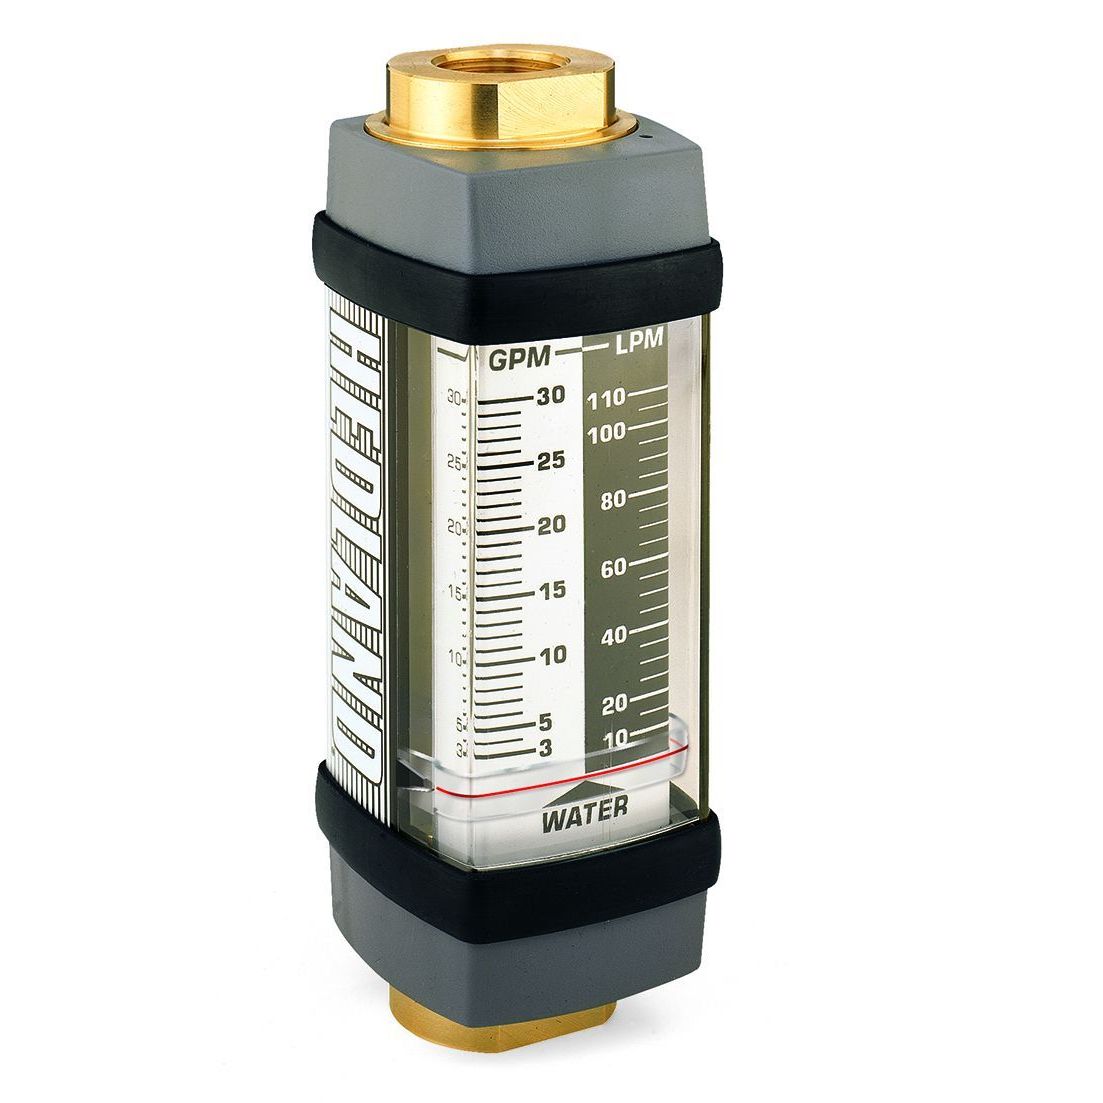 H754B-002 : Hedland 3500psi Brass Flow Meter for Water, #16 SAE (1), 0.2 to 2.0 GPM